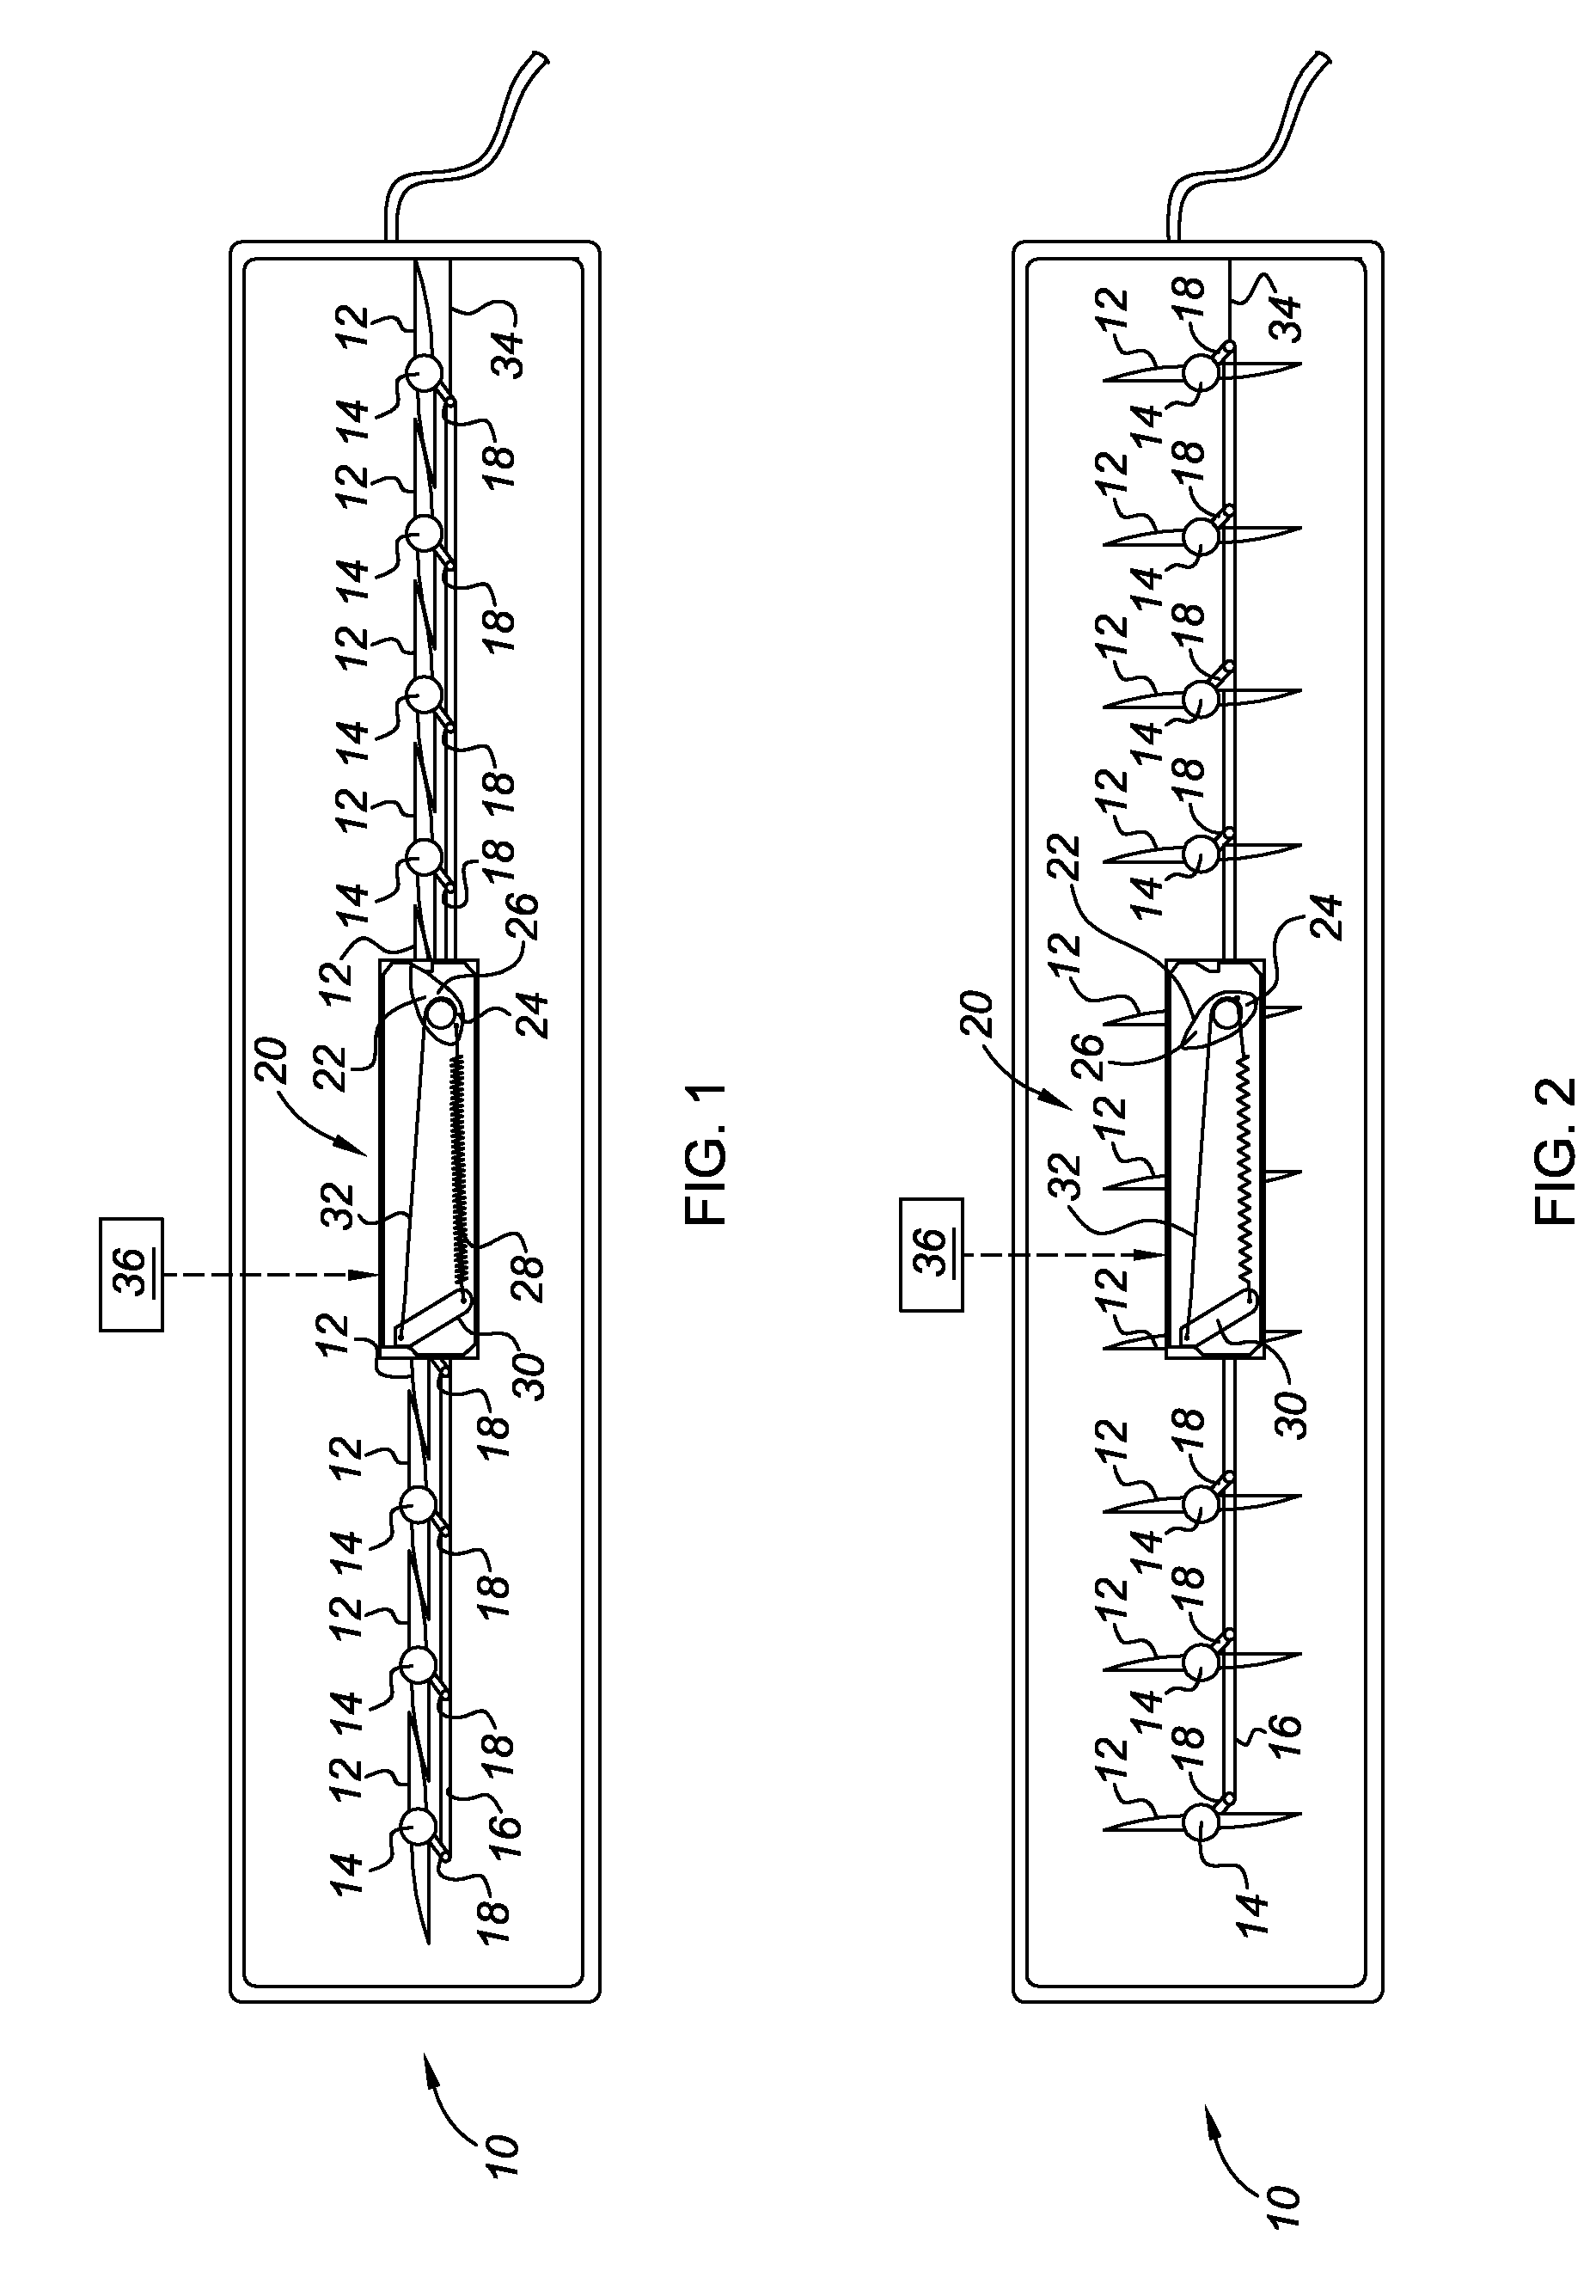 Active material actuated louver system